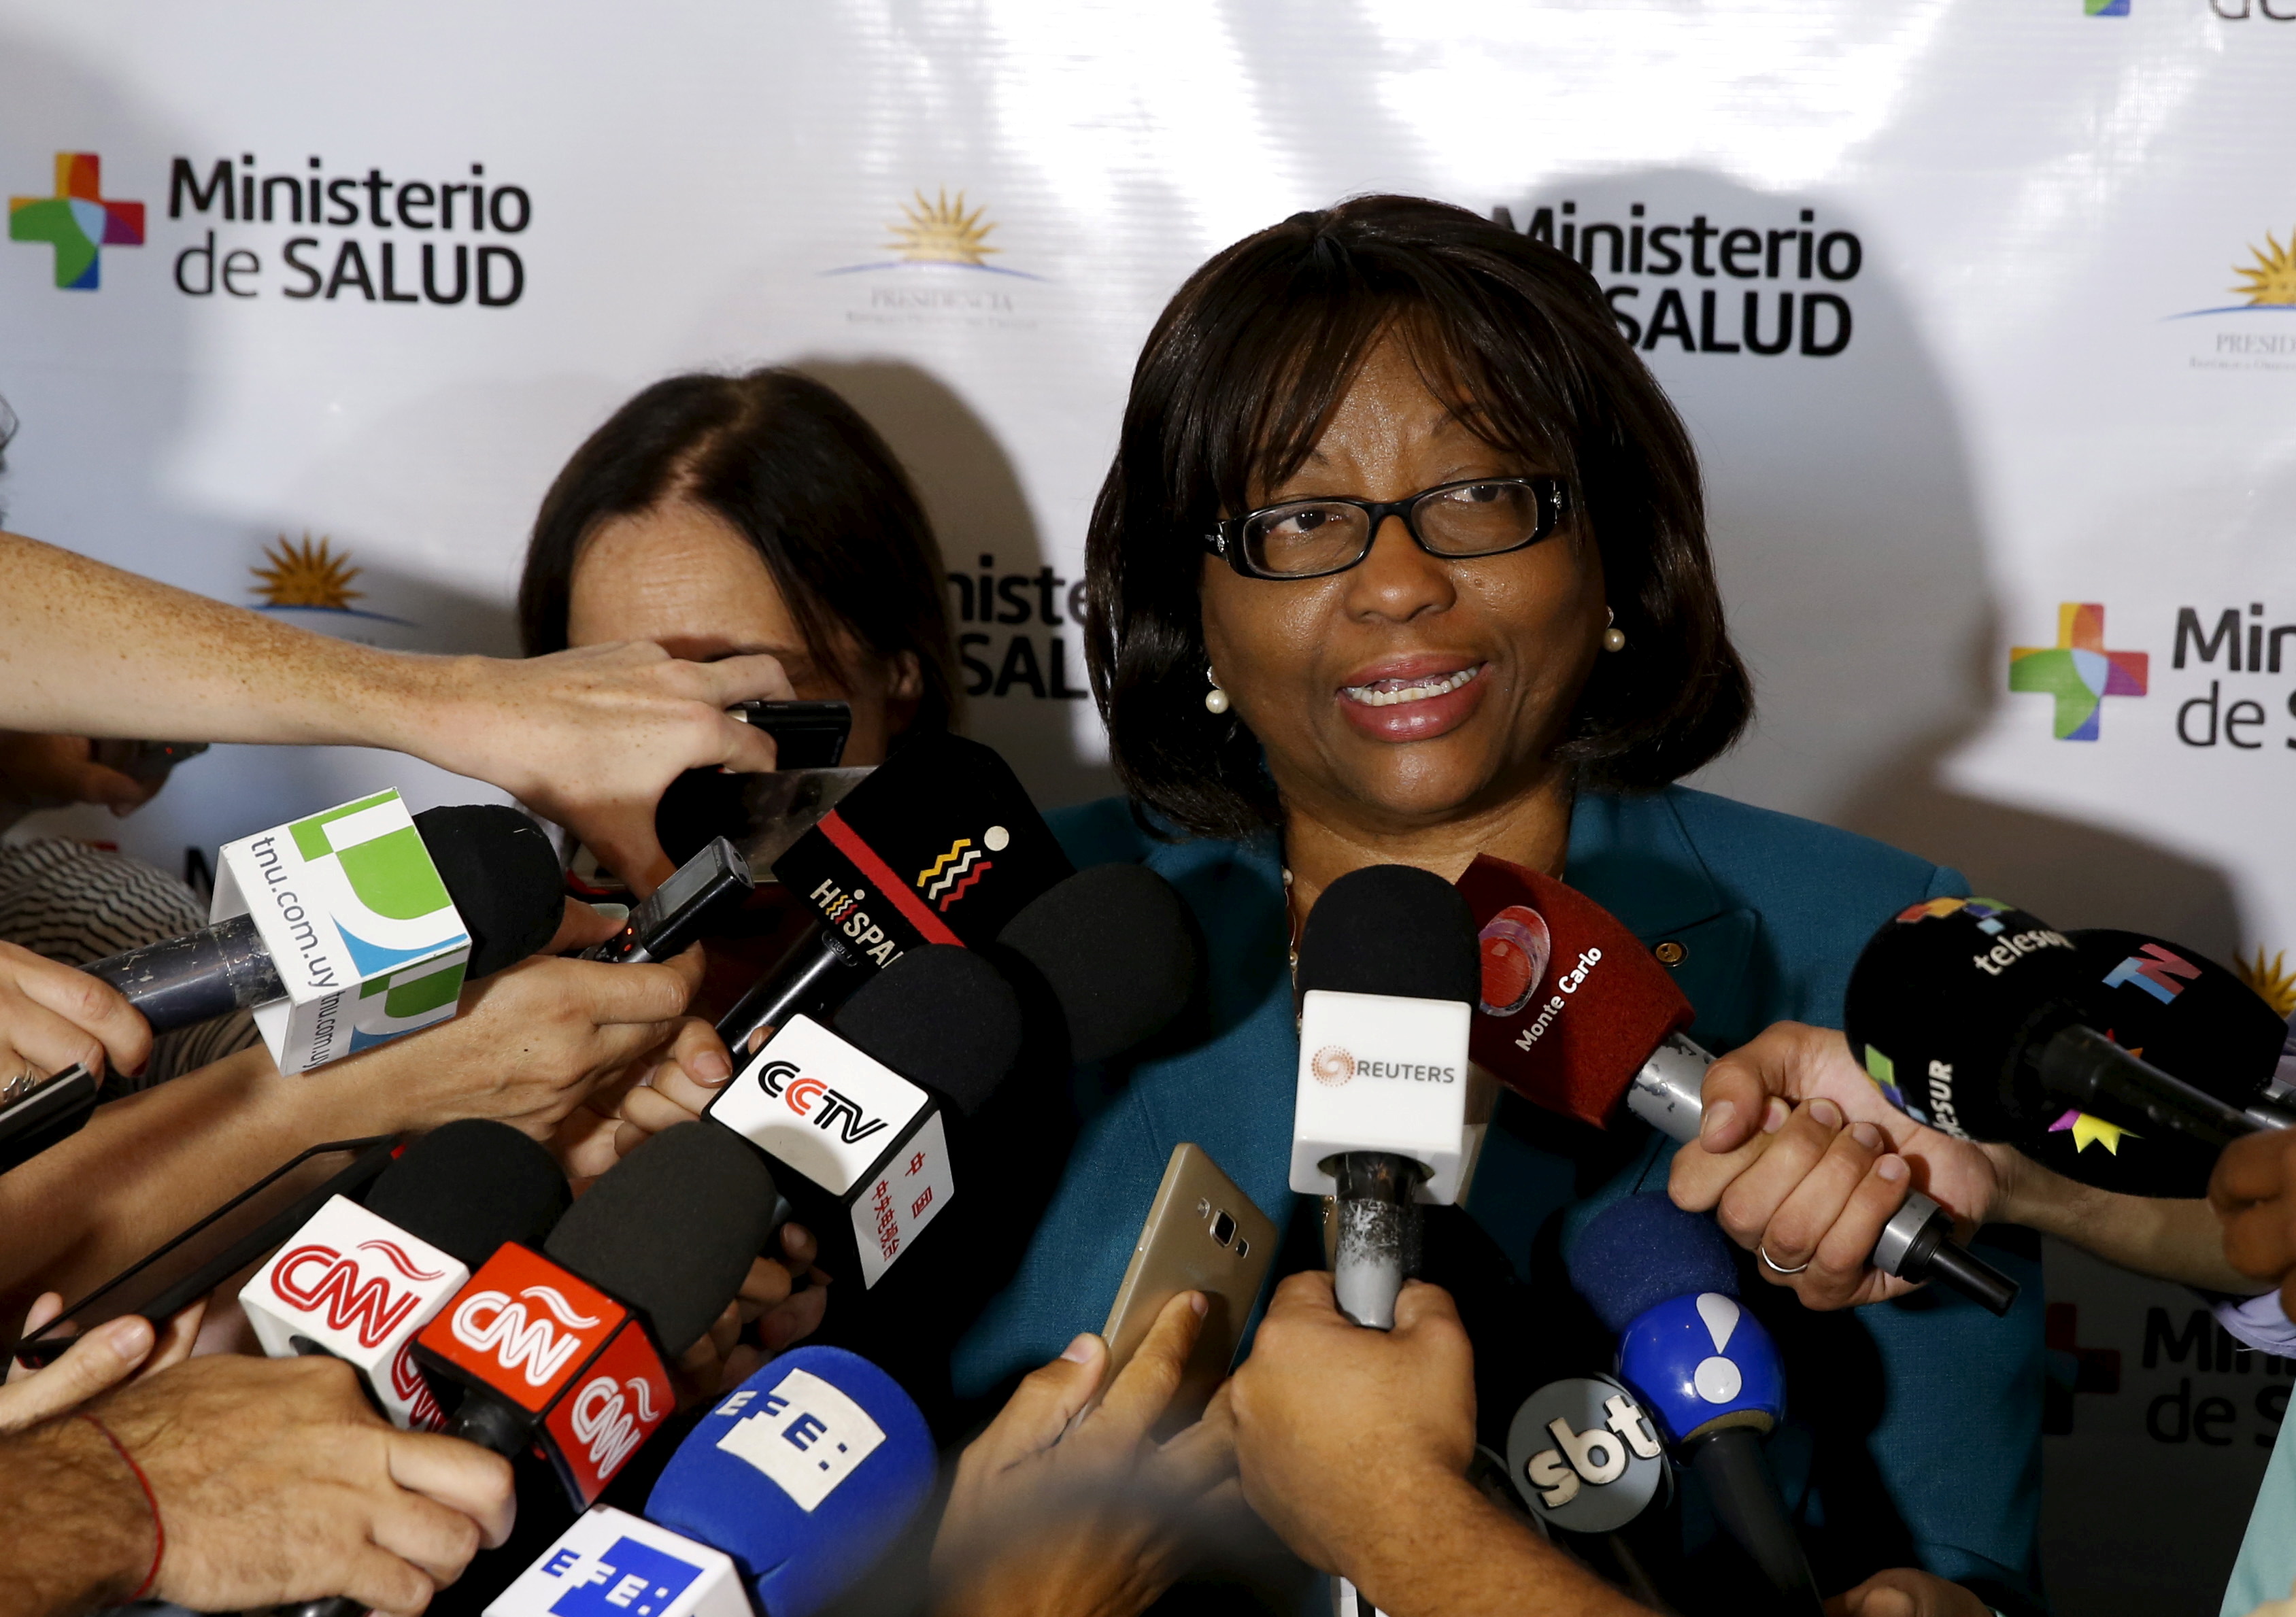 Director of the Pan American Health Organization Etienne, makes declarations to the media during a meeting of Public Health ministers of the Mercosur trade block to discuss policies to deal with the Zika virus, in Montevideo